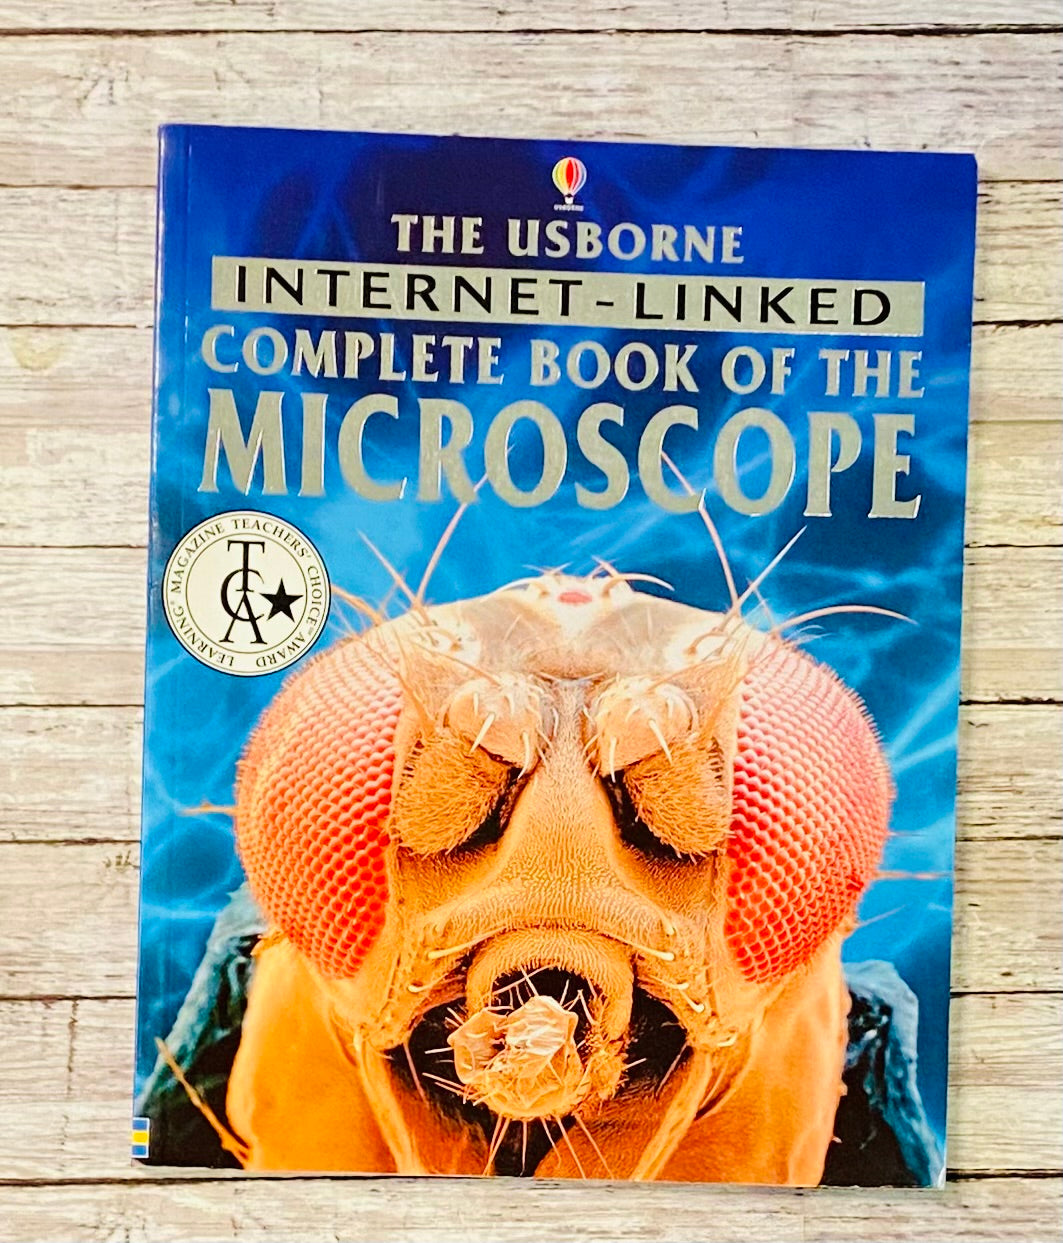 The Usborne Complete Book of the Microscope - Anchored Homeschool Resource Center